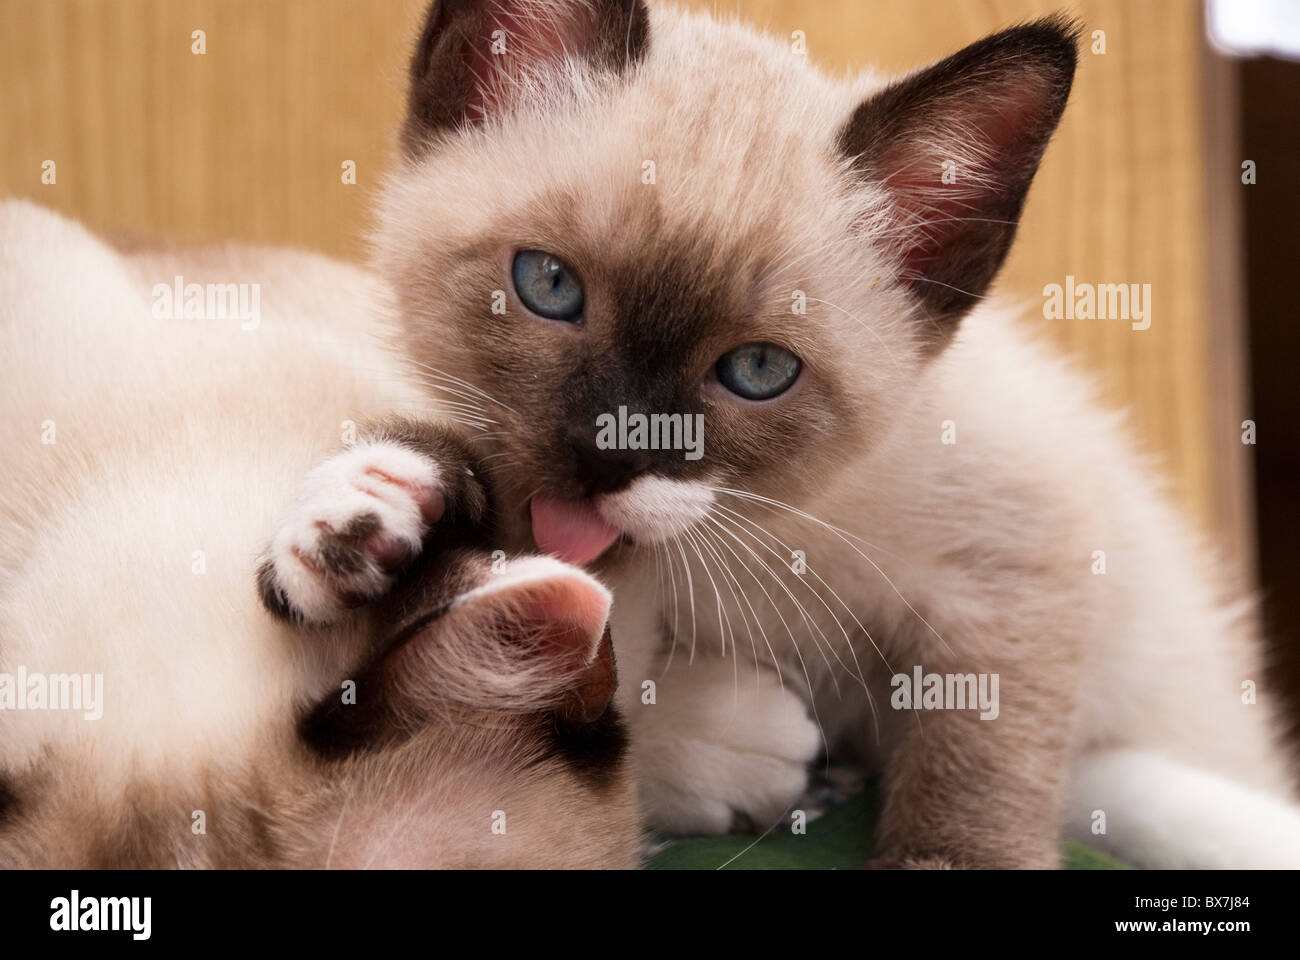 My month old kitten licking its mother playfully Stock Photo